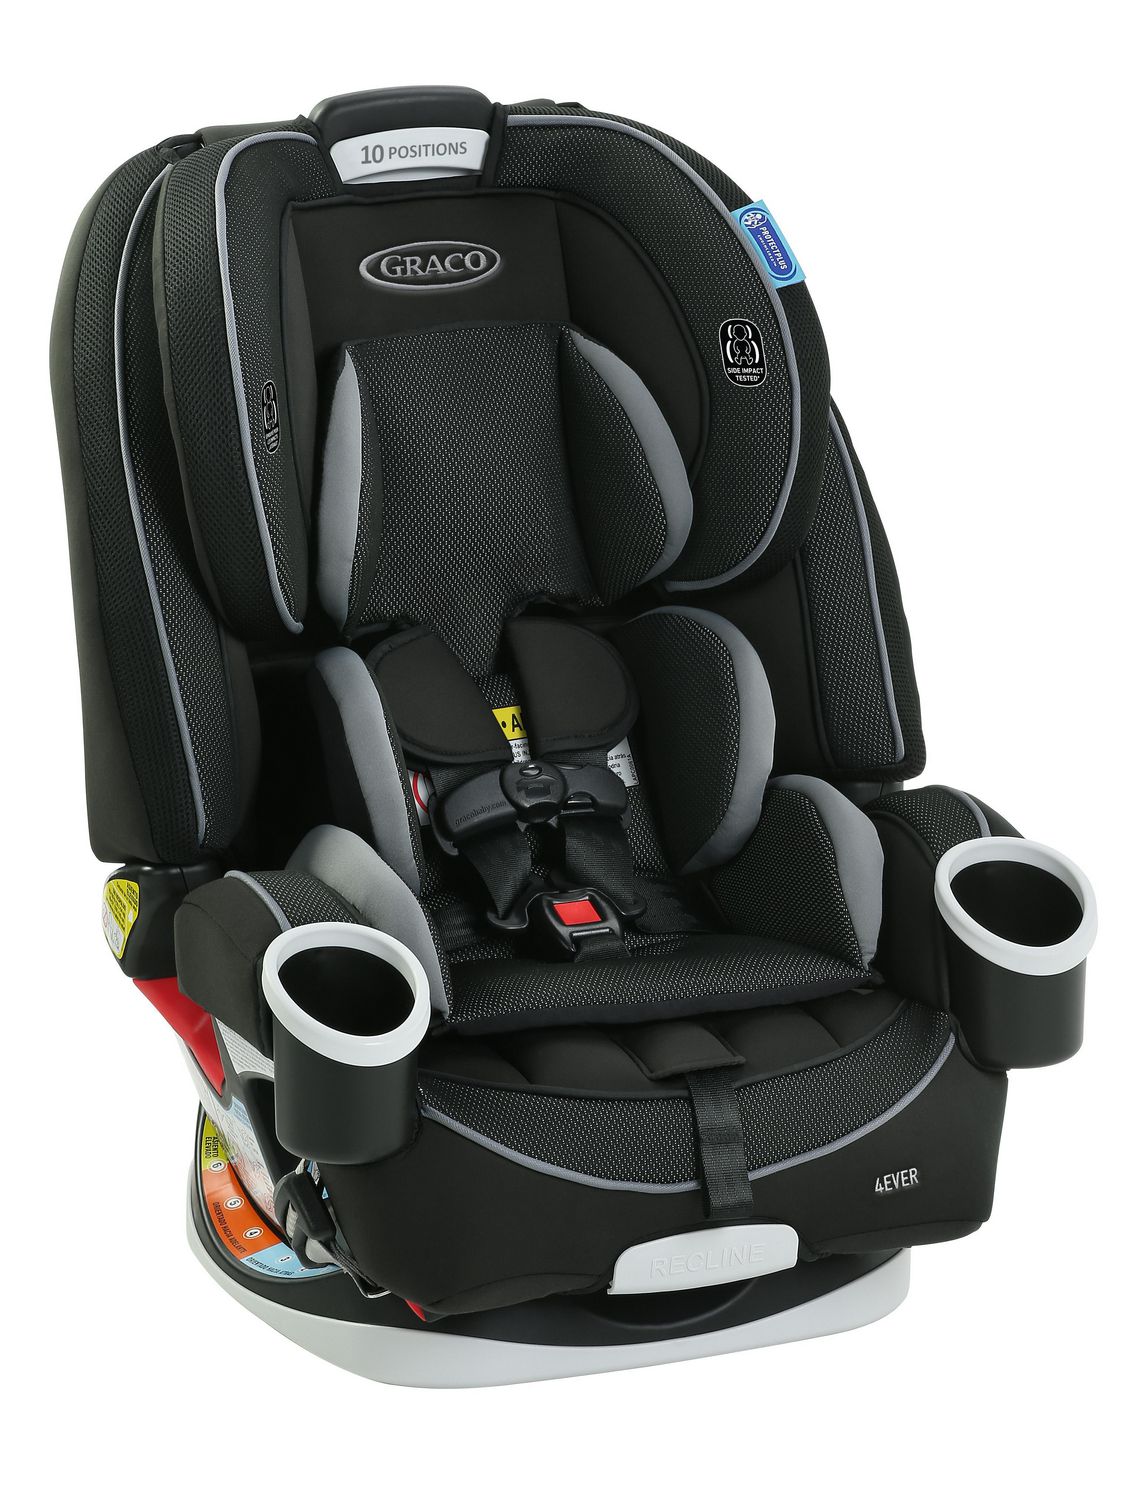 Graco 4Ever 4-in-1 Convertible Car Seat | Black